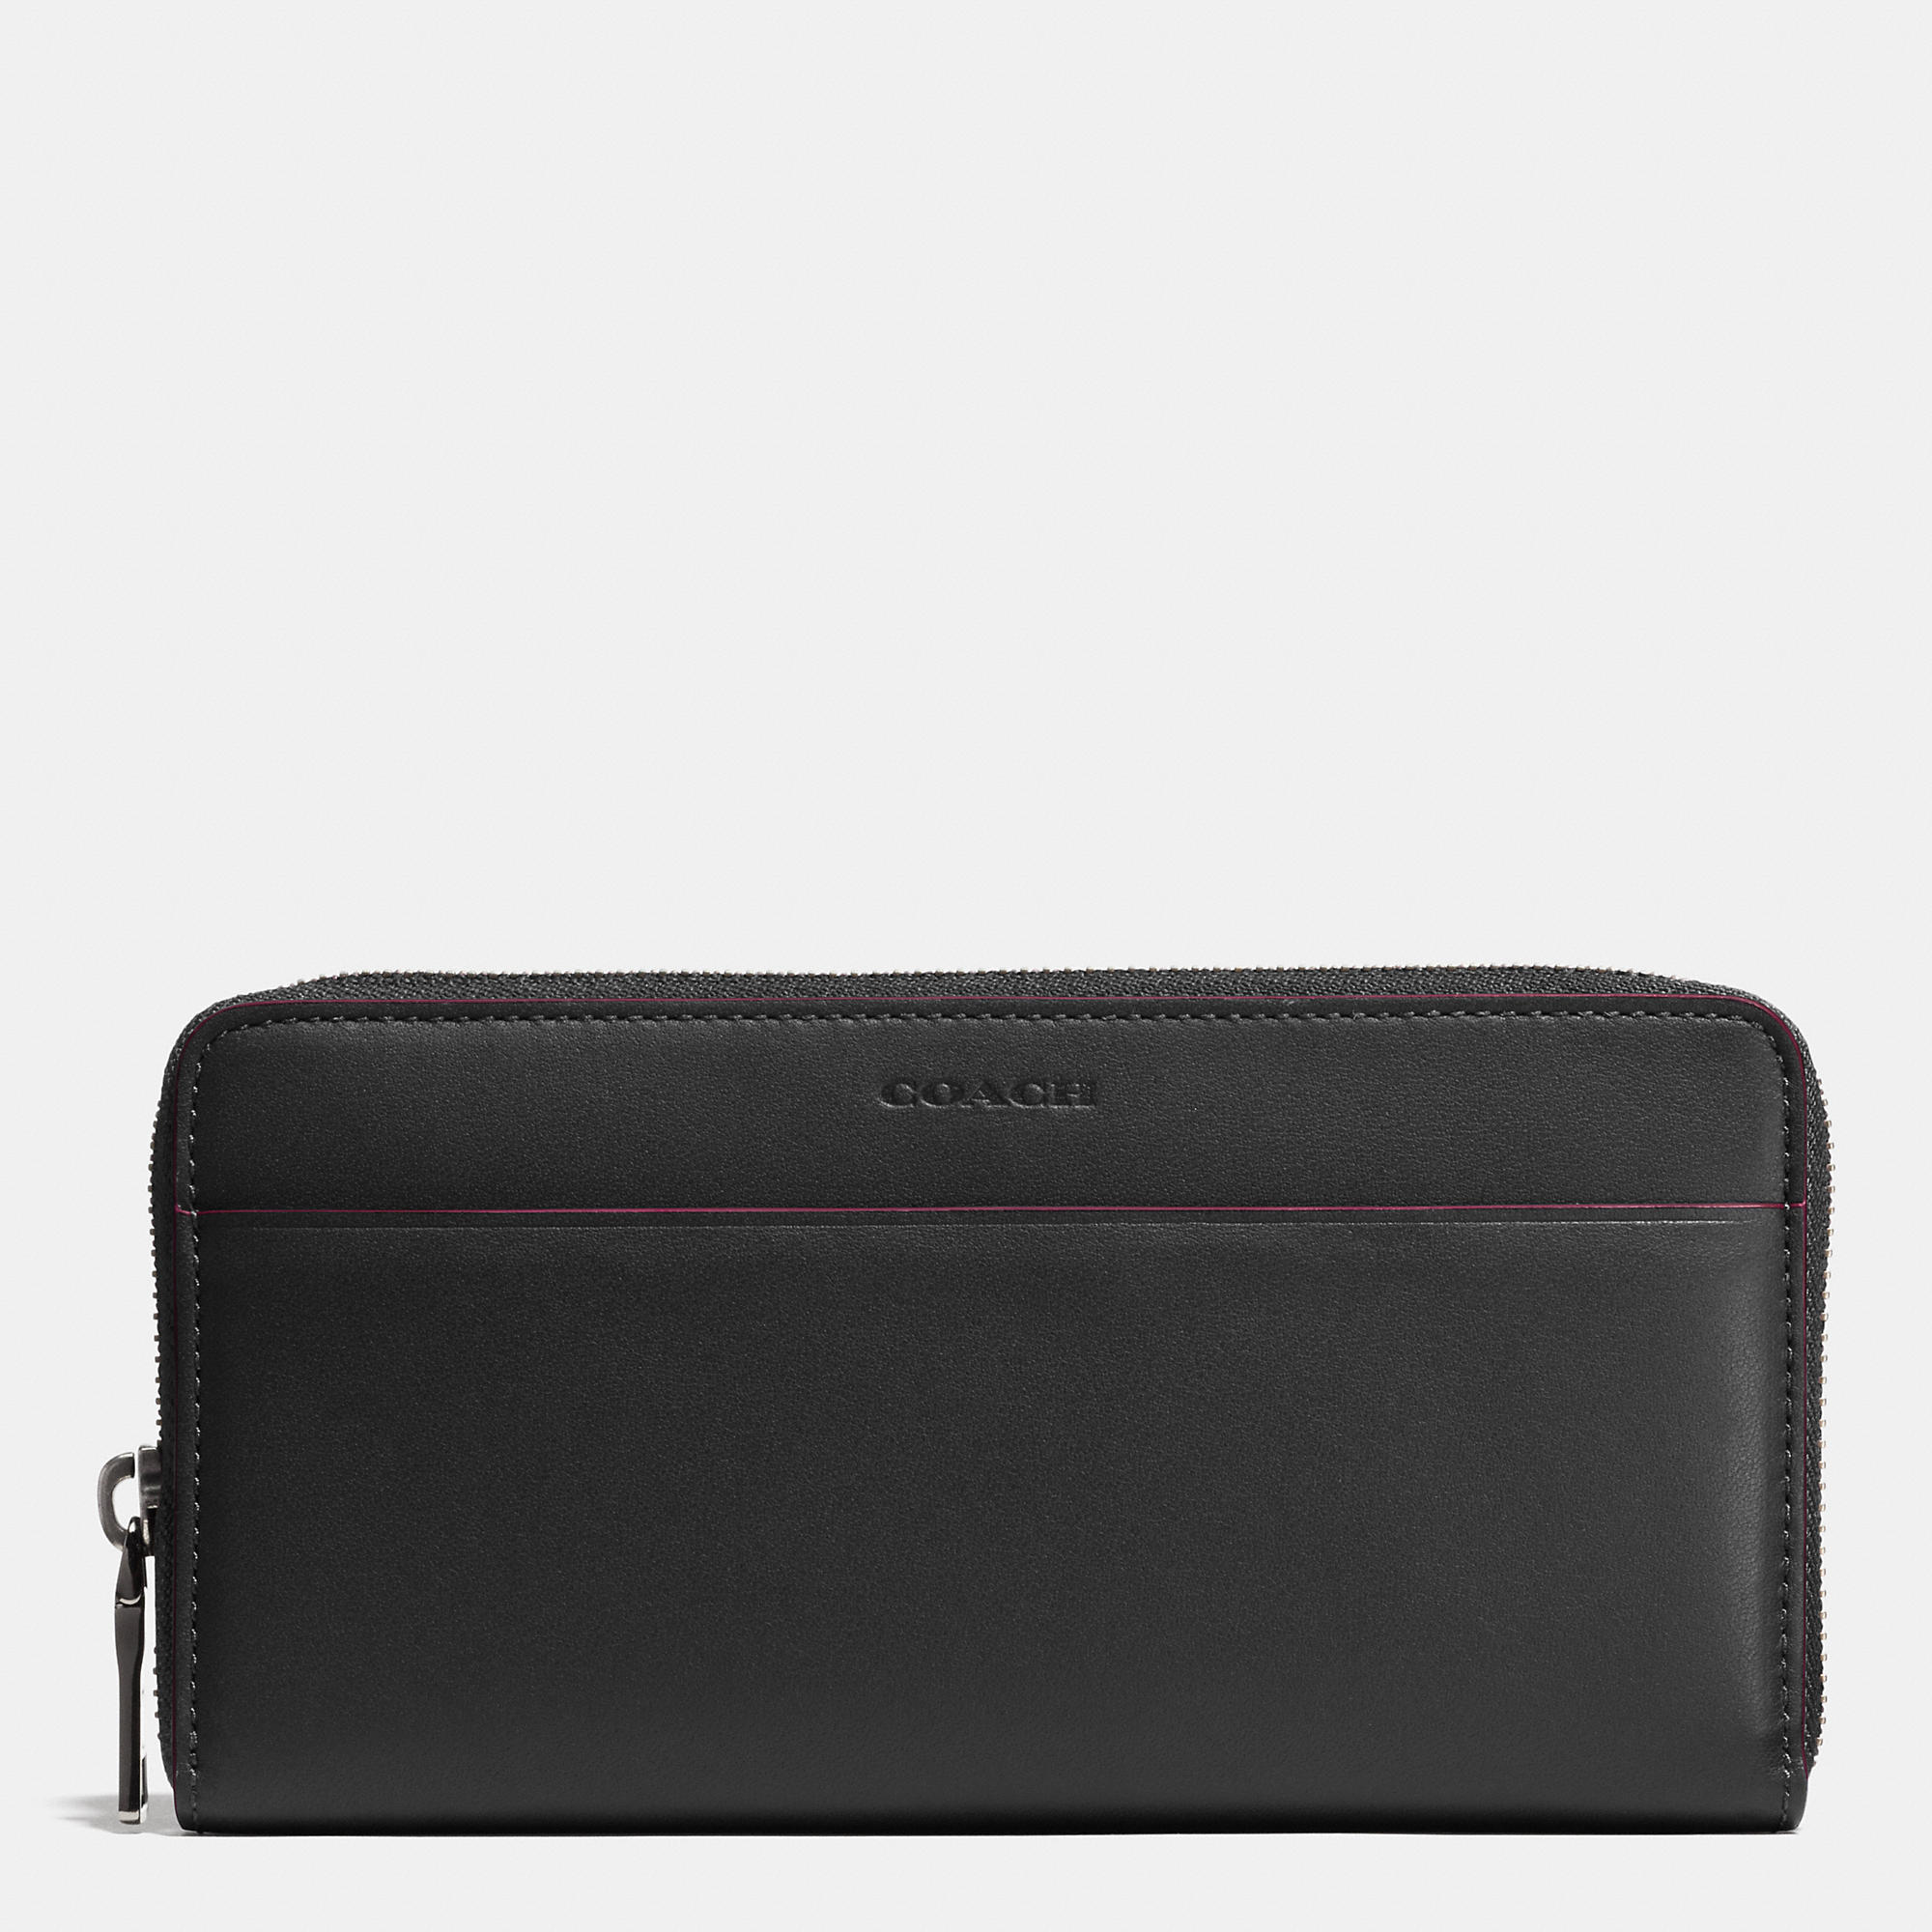 New Realer Coach Accordion Zip Wallet In Glovetanned Leather